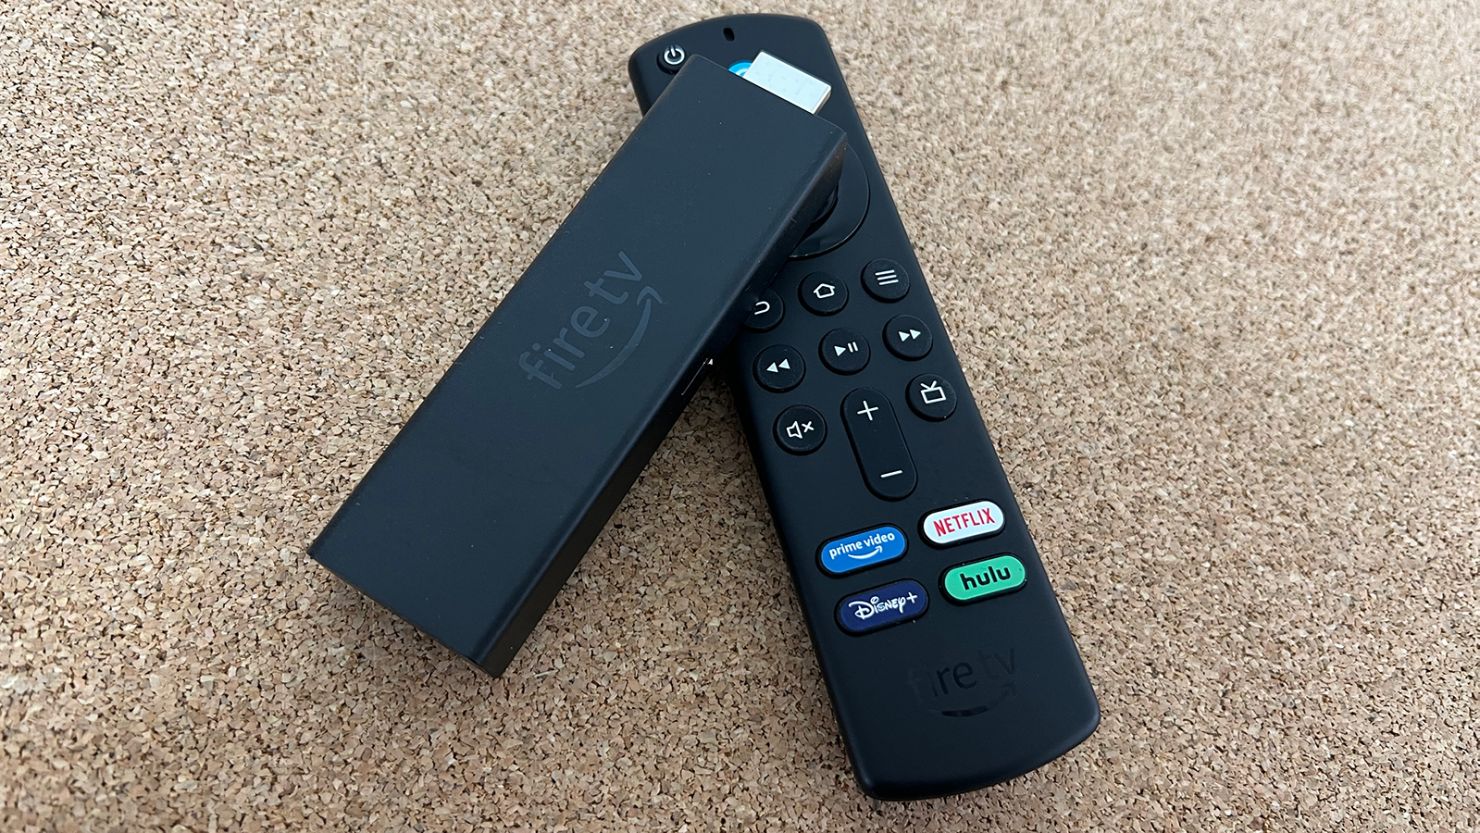 The Fire TV Stick 4K Is Back to All-Time Low of $25 With This